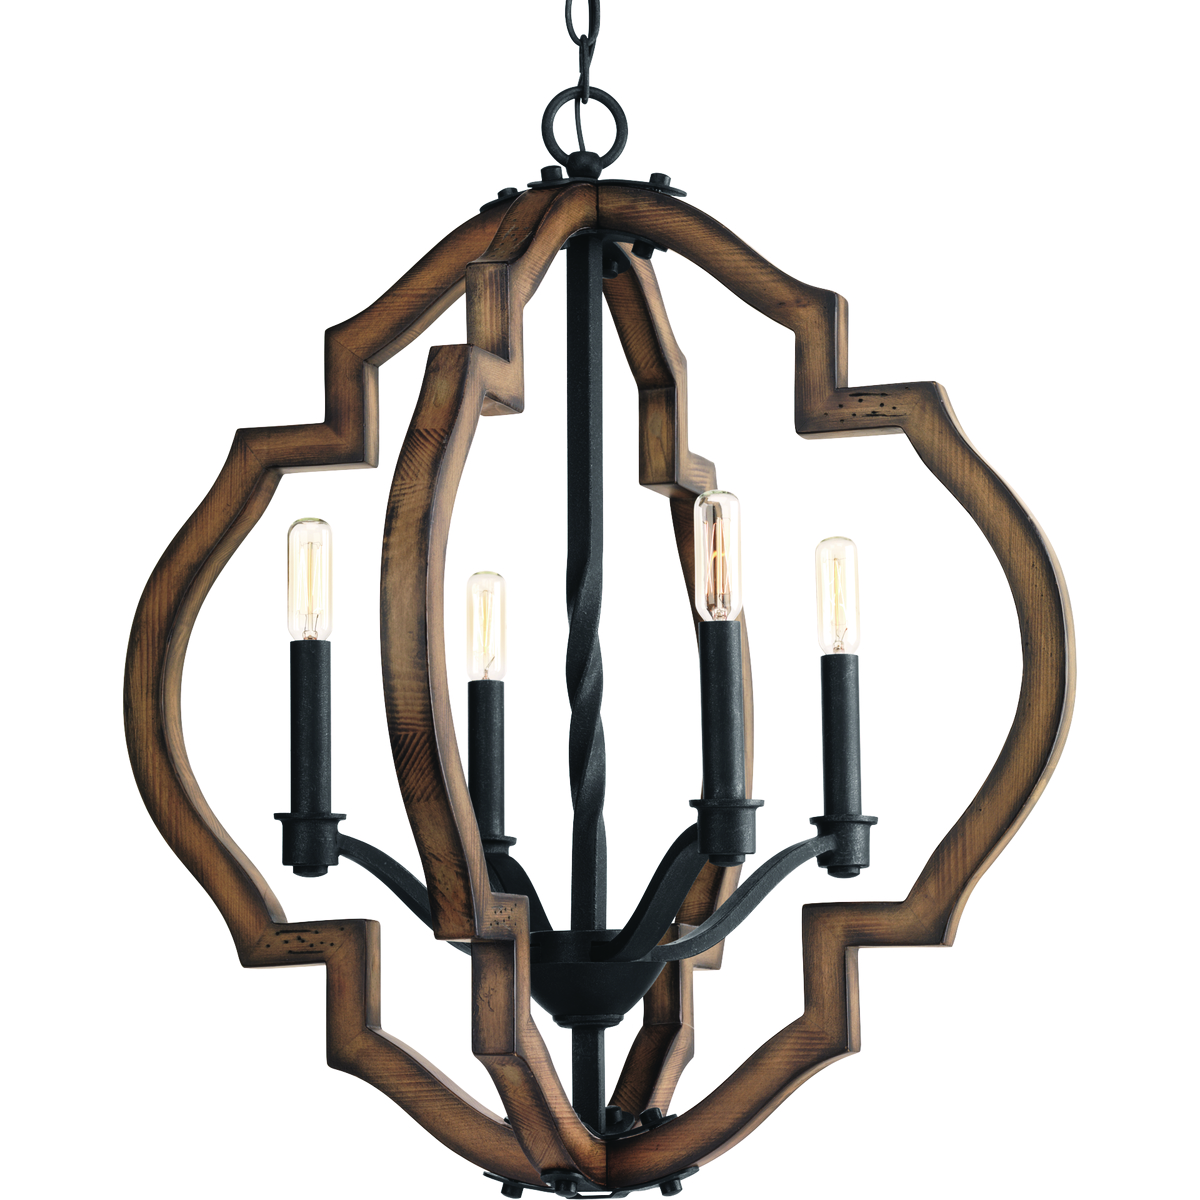 The statement-making four-light Spicewood pendant features a rich, solid wood surrounded in a classic quatrefoil pattern. Wrought iron metal fittings in a Gilded Iron finish are paired with a distressed pine frame to complement rustic and reclaimed design styles.